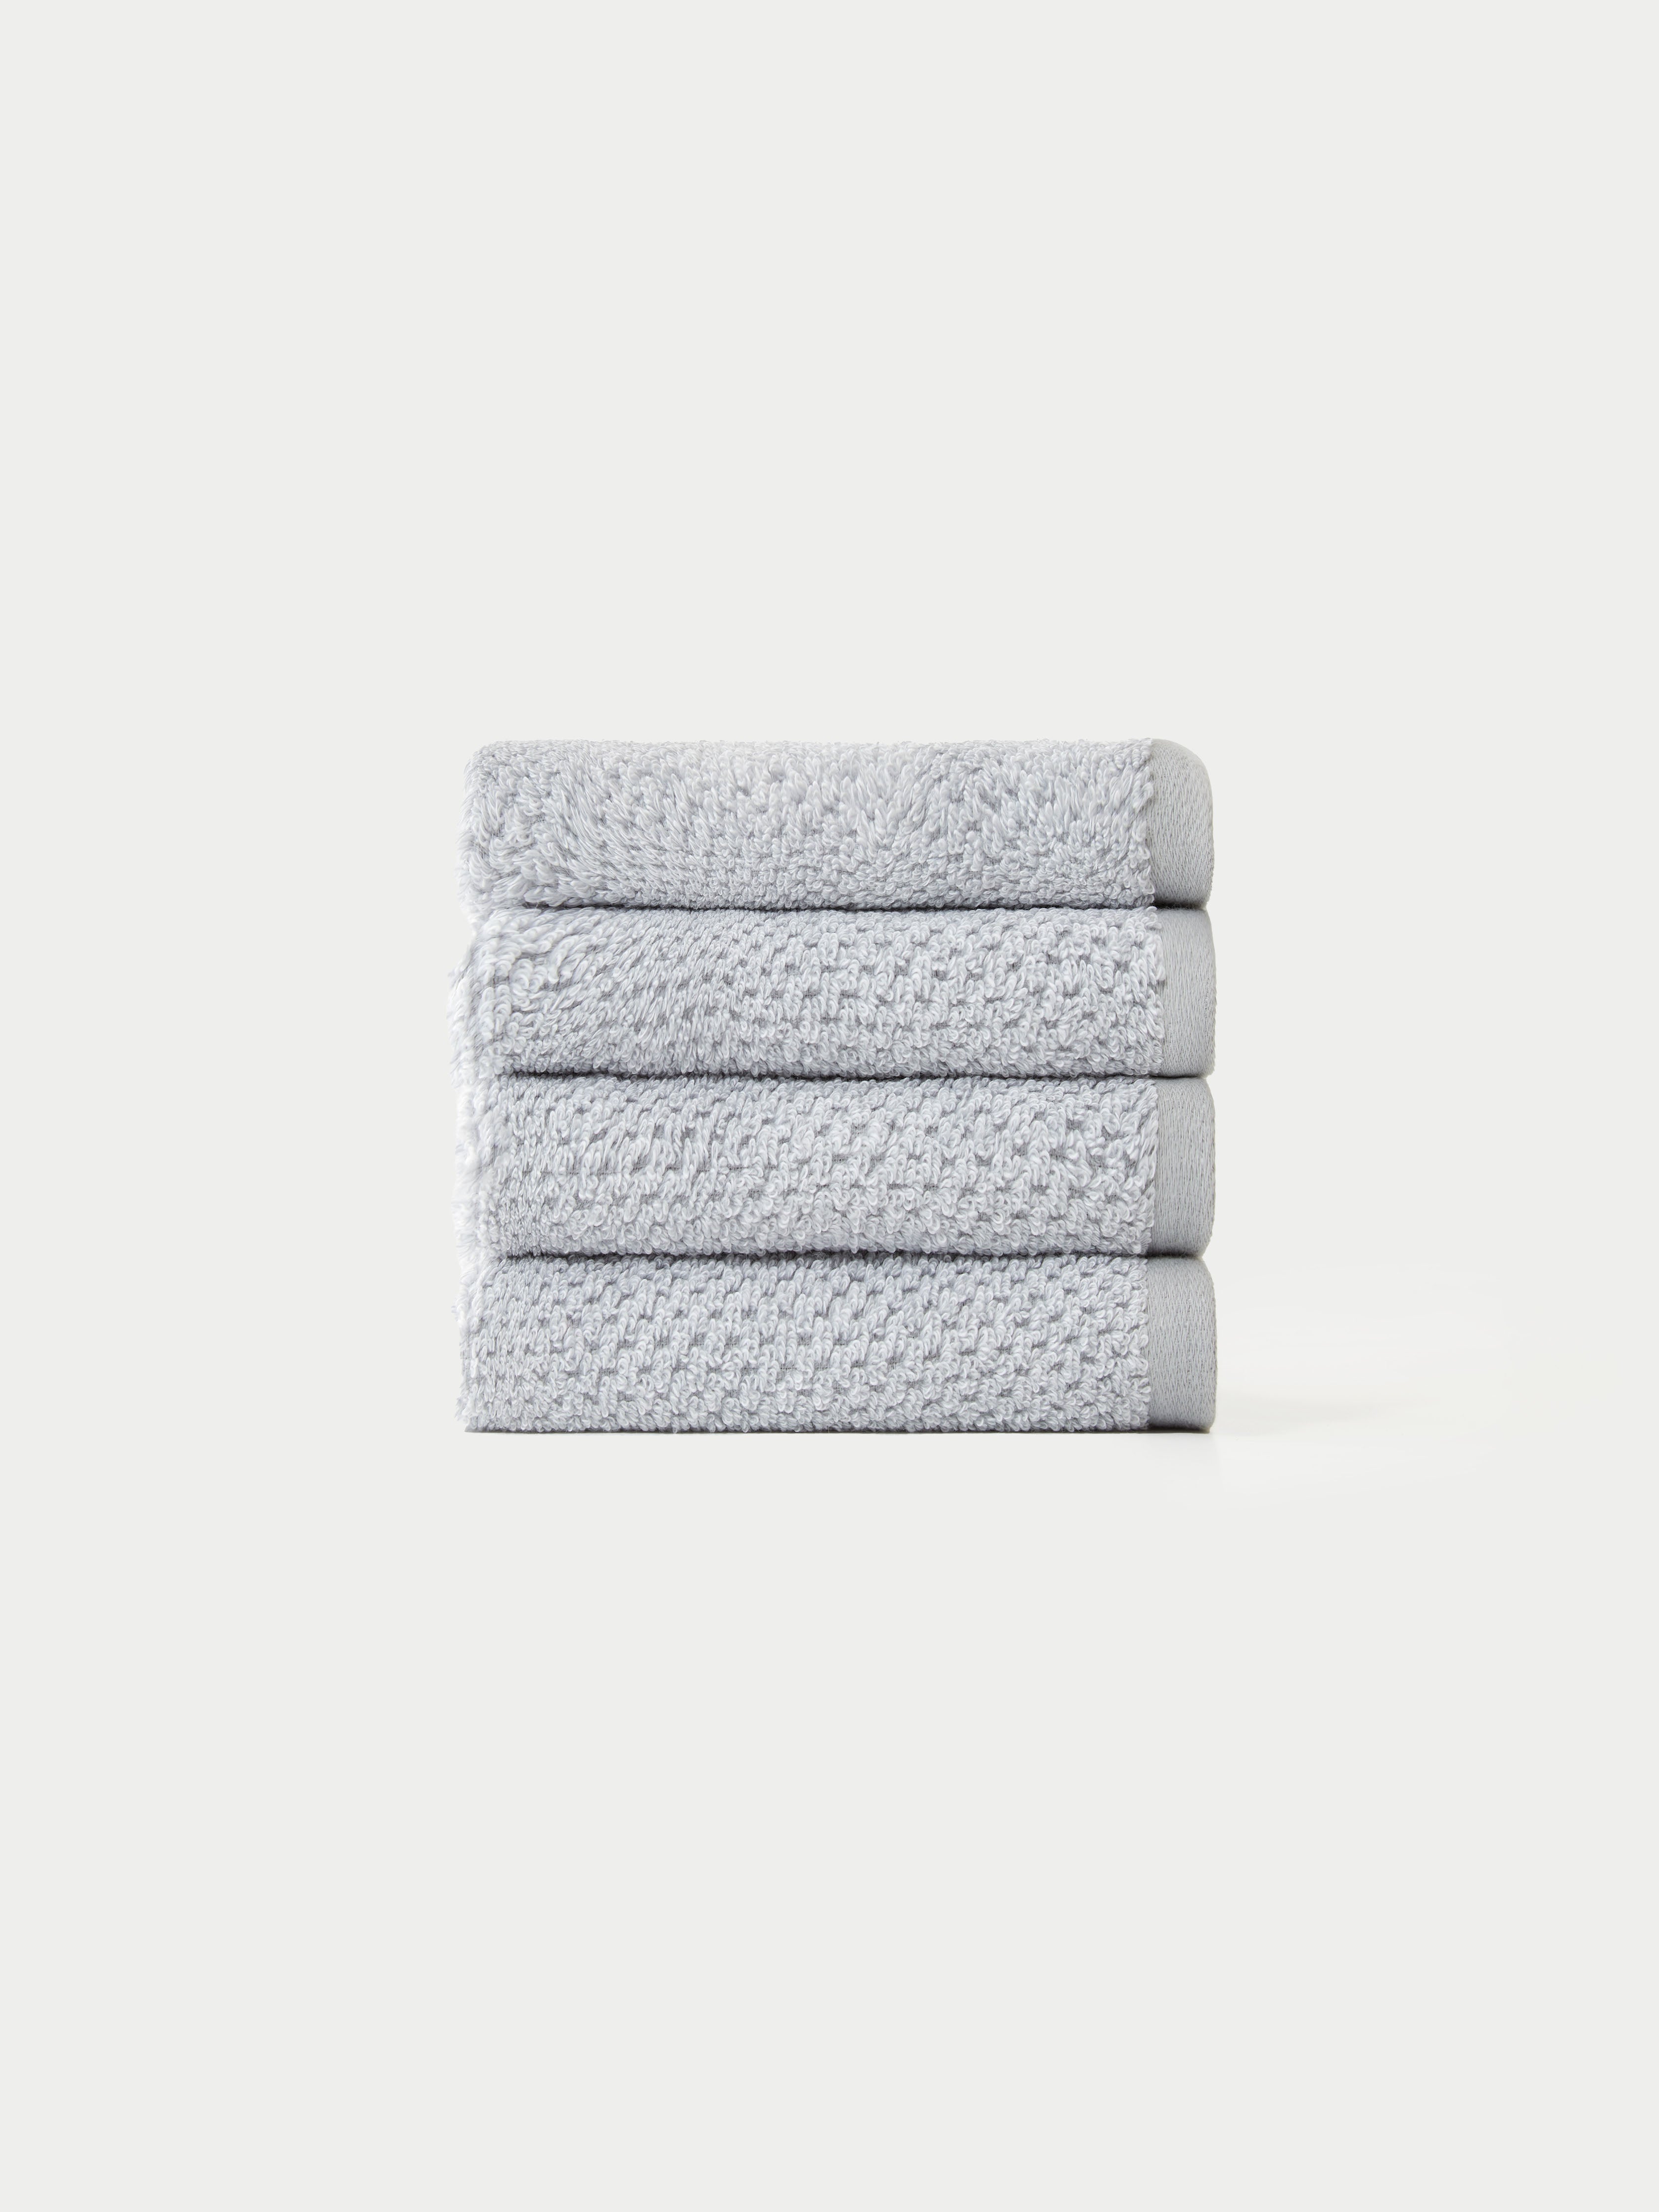 Nantucket Wash Cloths in the color Heathered Harbor Mist. The Wash Cloths are neatly folded. The photo of the wash cloths was taken with a white background.|Color:Heathered Harbor Mist